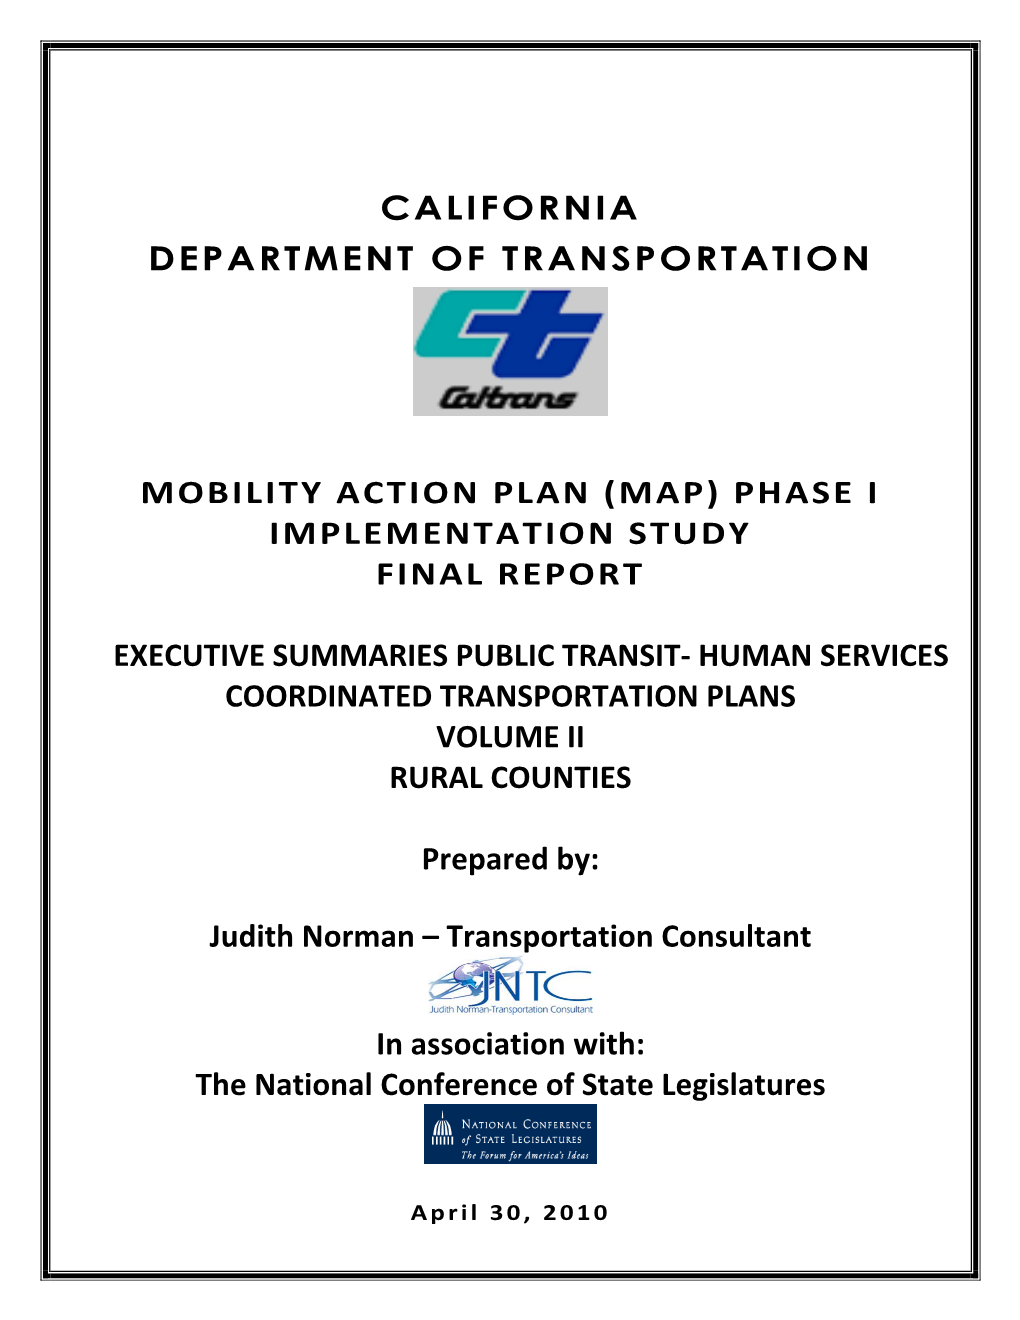 Mobility Action Plan (Map) Phase I Implementation Study Final Report Executive Summaries Public Transit- Human Services Coordina